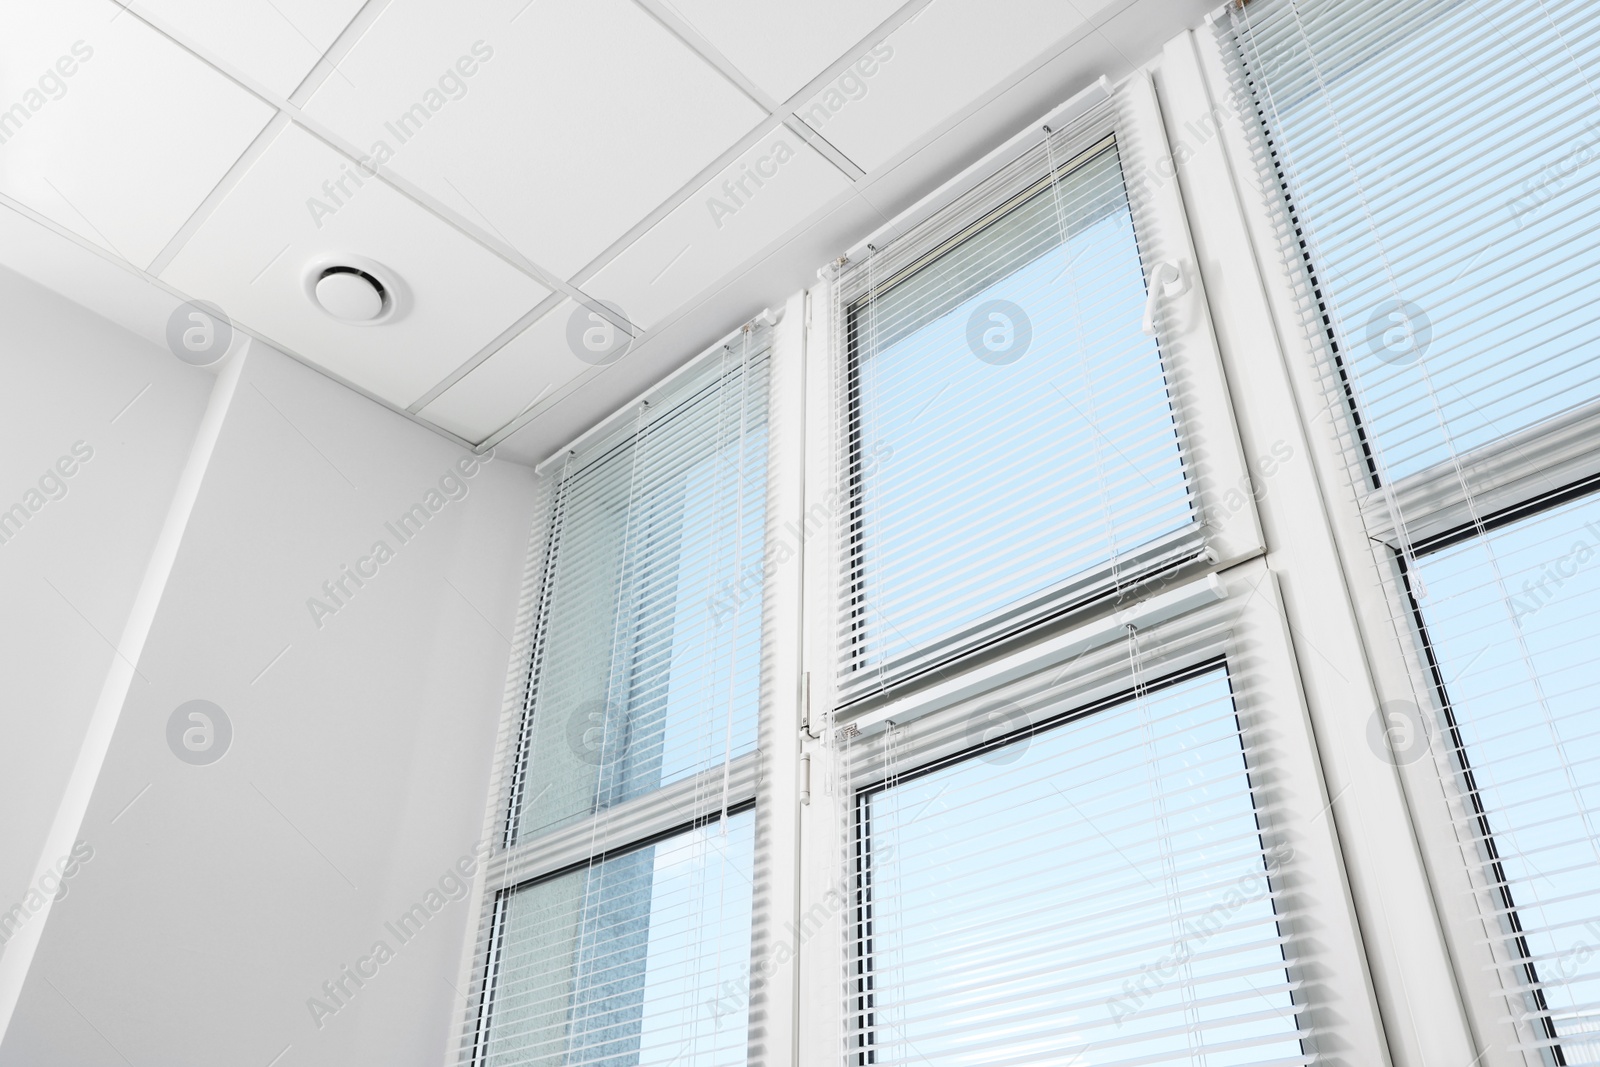 Photo of Large window with horizontal blinds indoors, low angle view